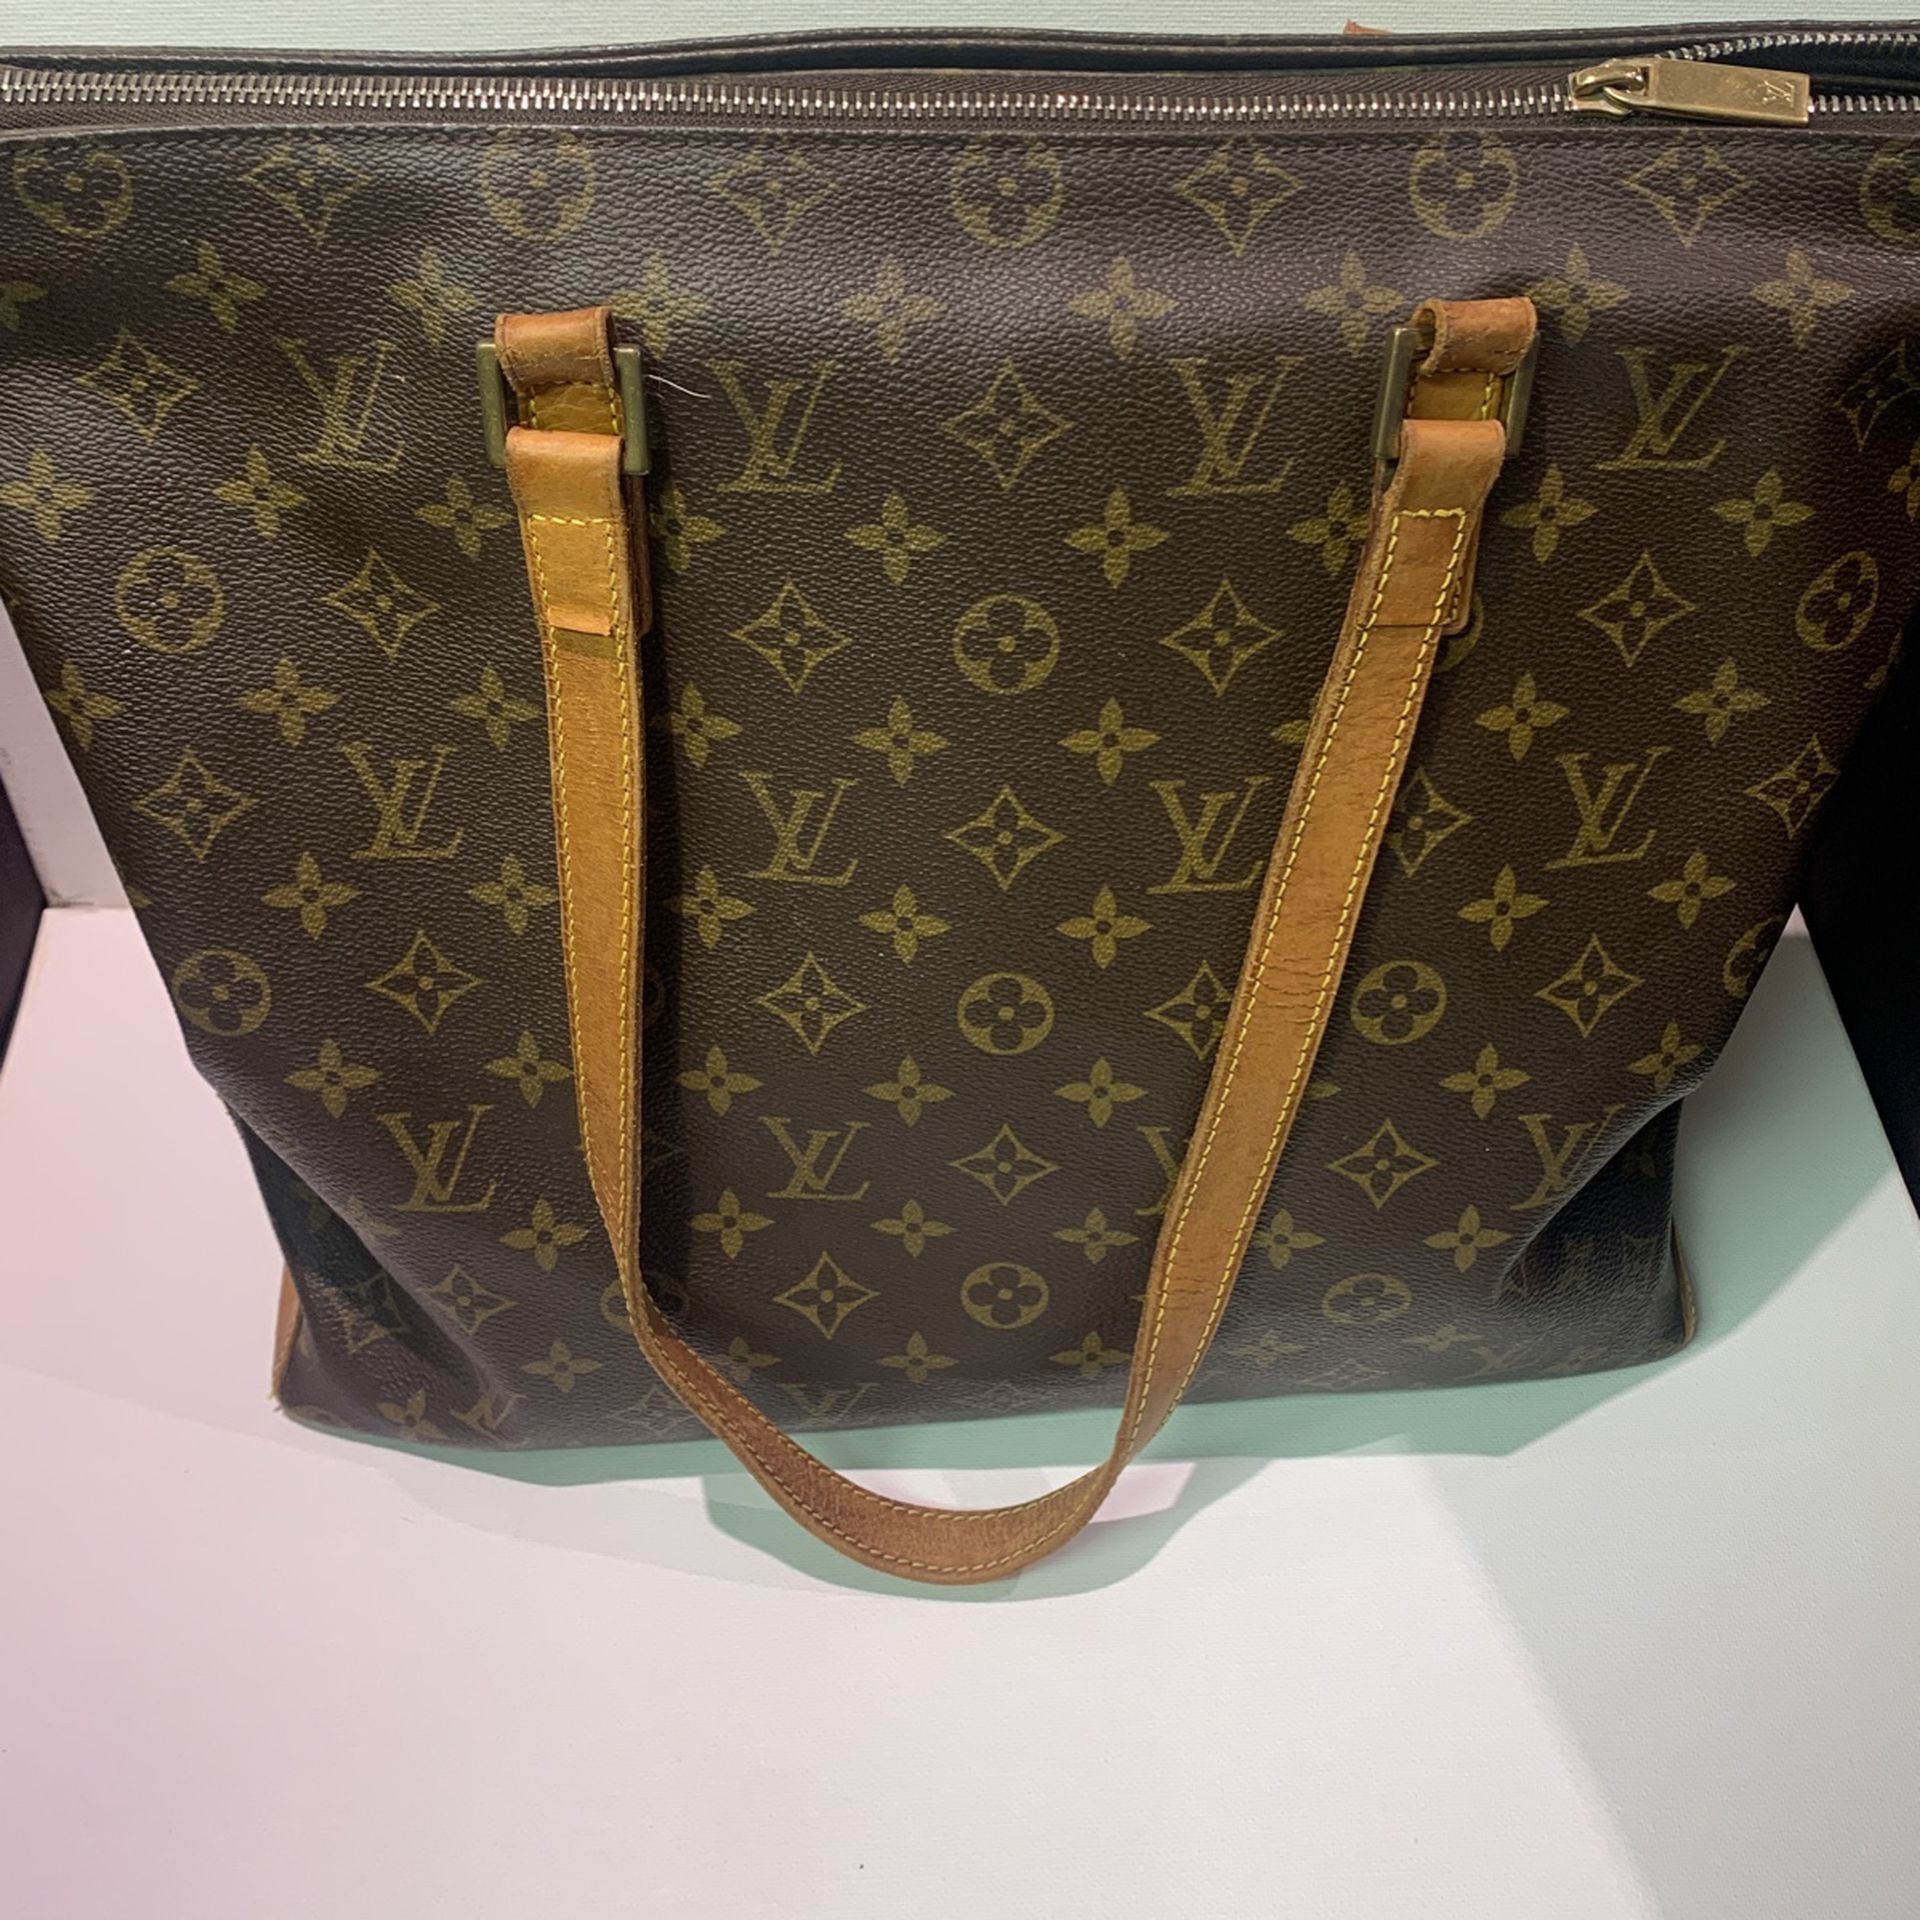 3 Real Lv Bags for Sale in East Haven, CT - OfferUp